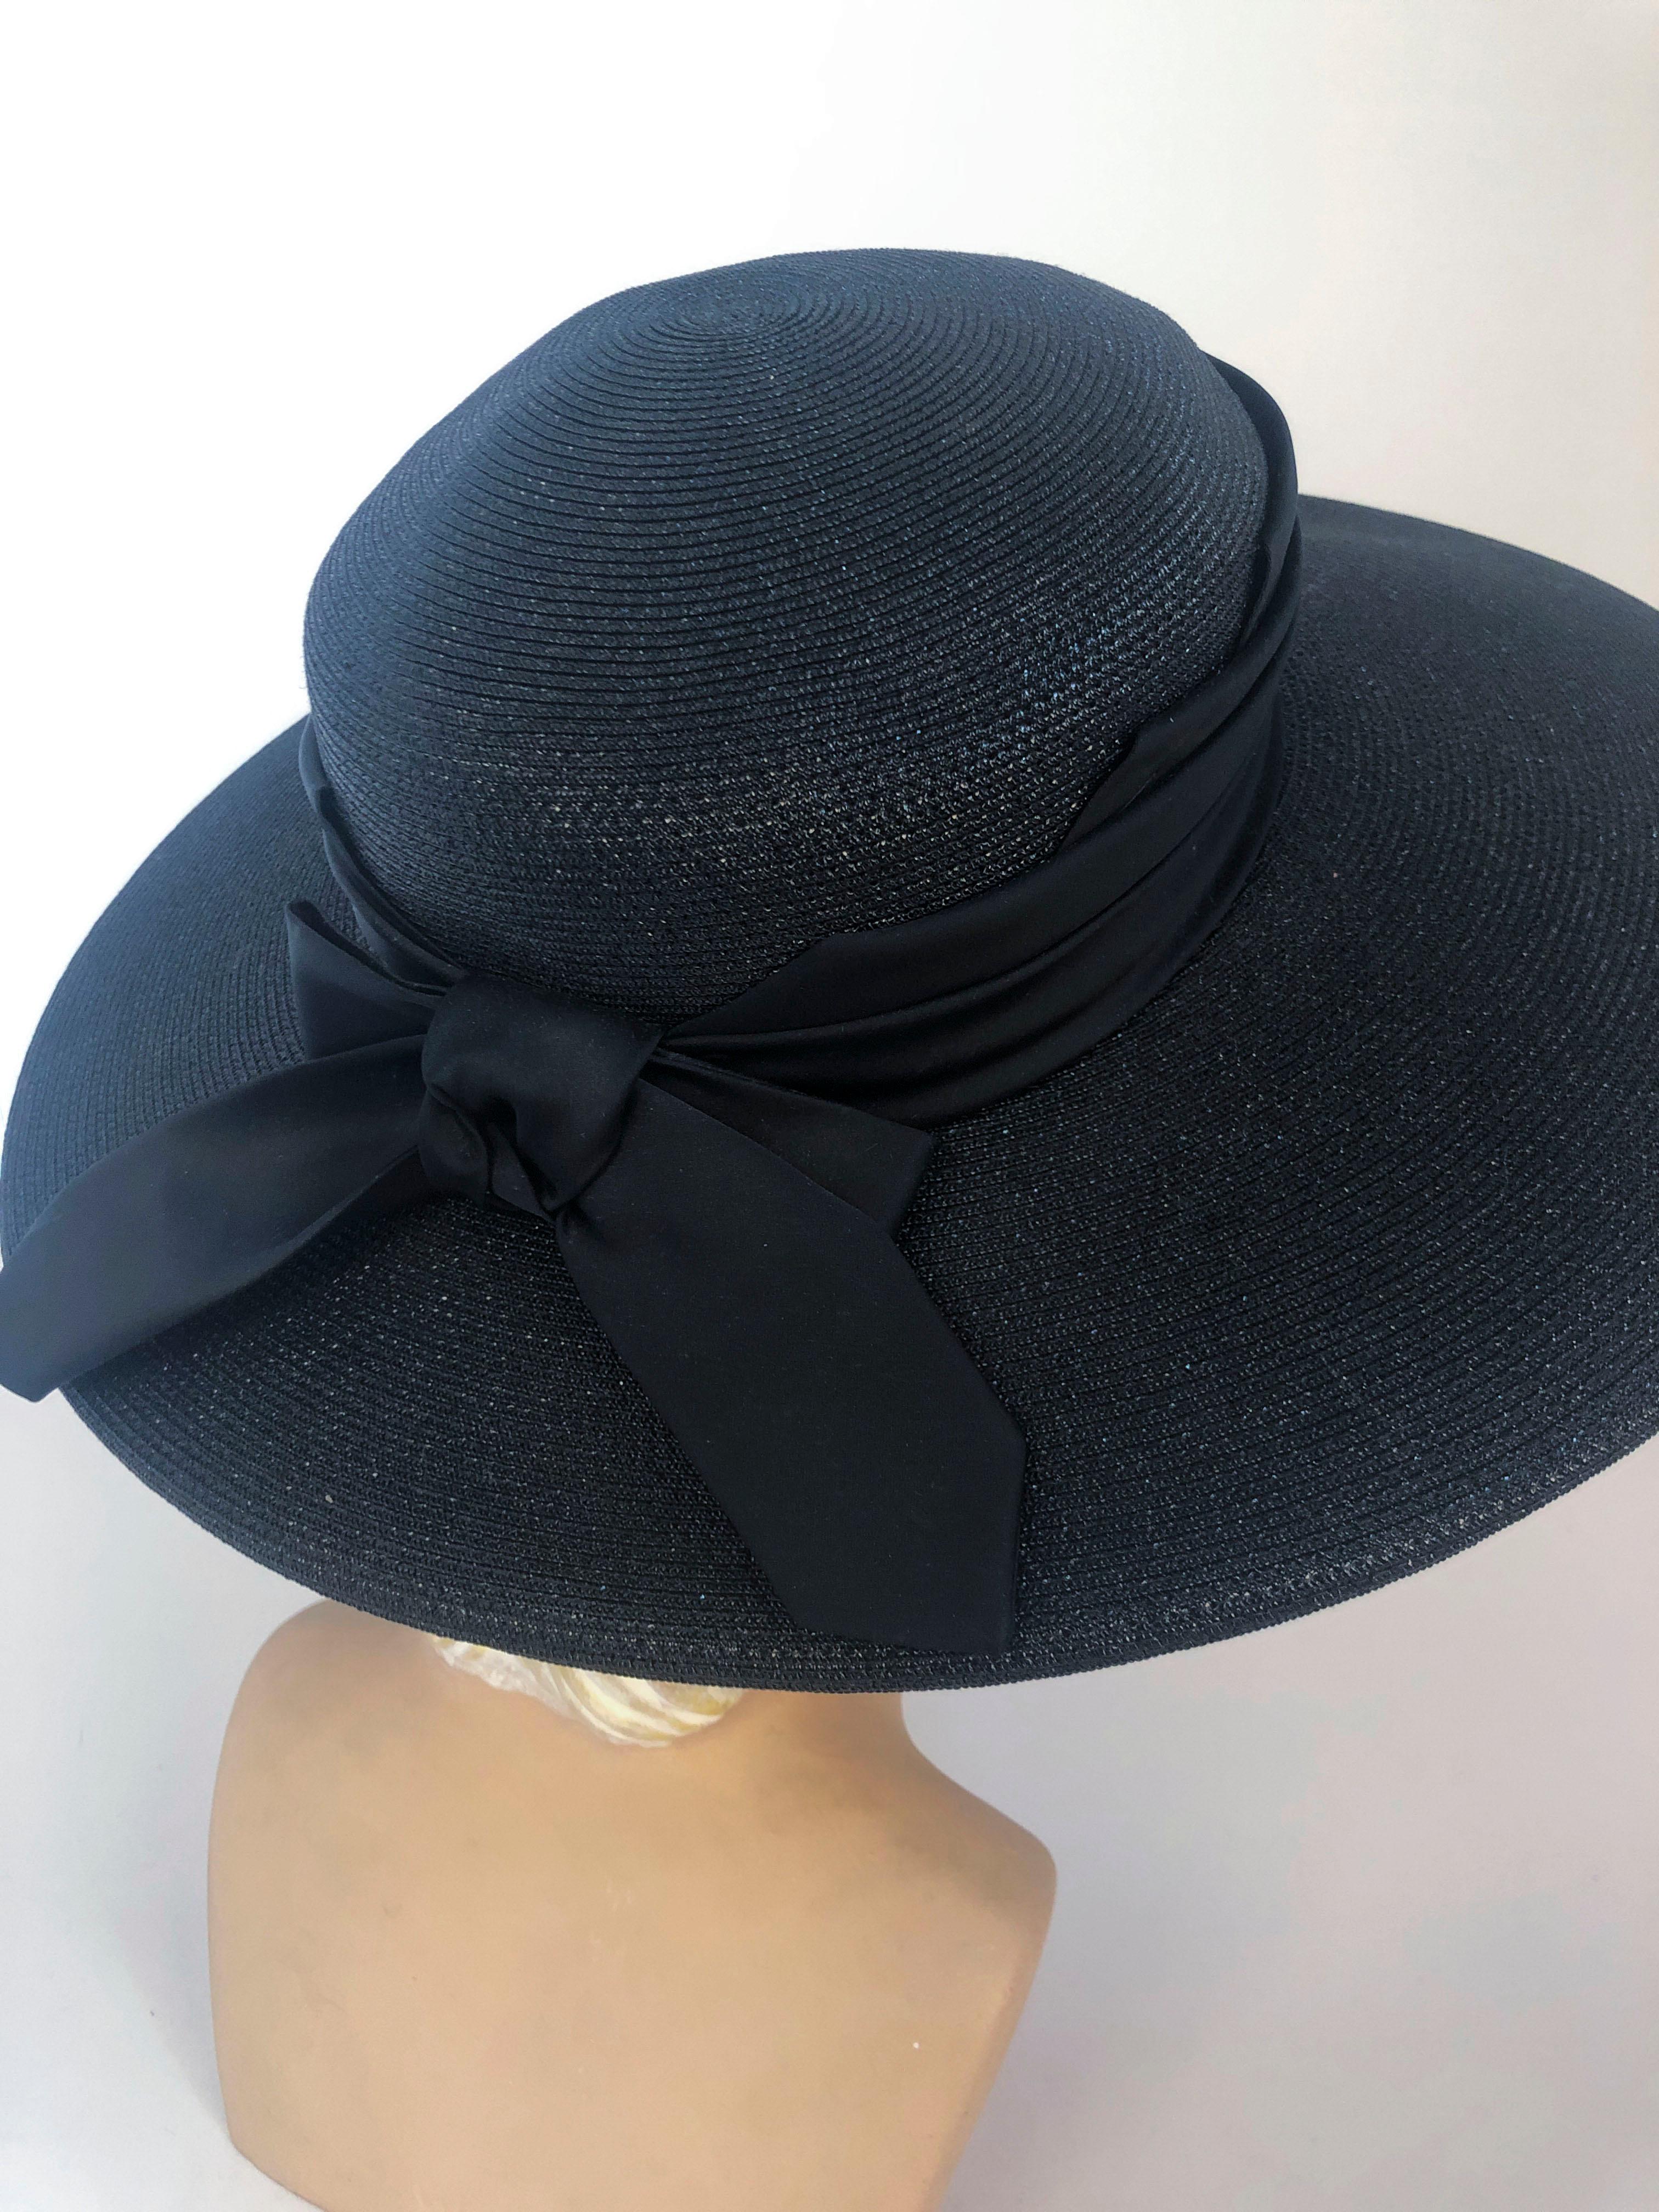 1960's Black Straw Hat with Wide Tiered Satin Band and Bow 5